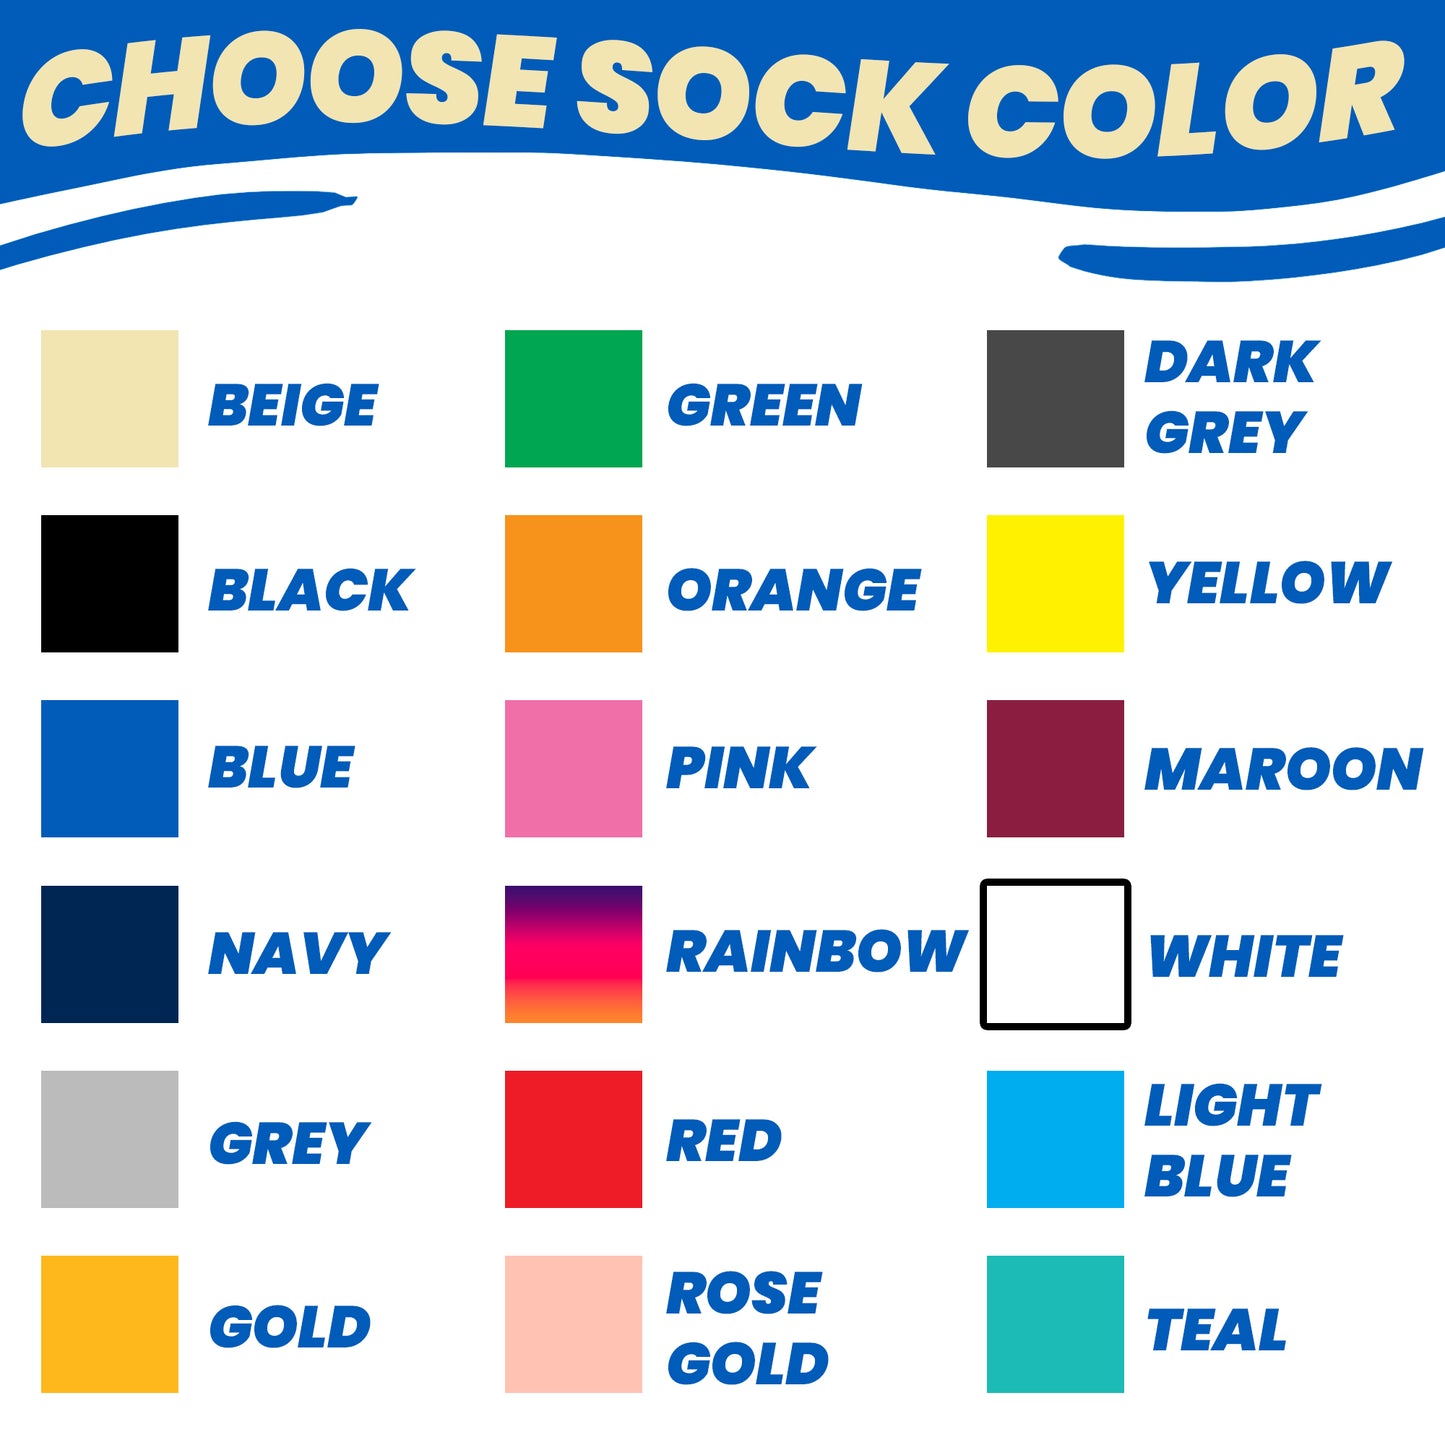 personalized volleyball socks showing sock color swatches